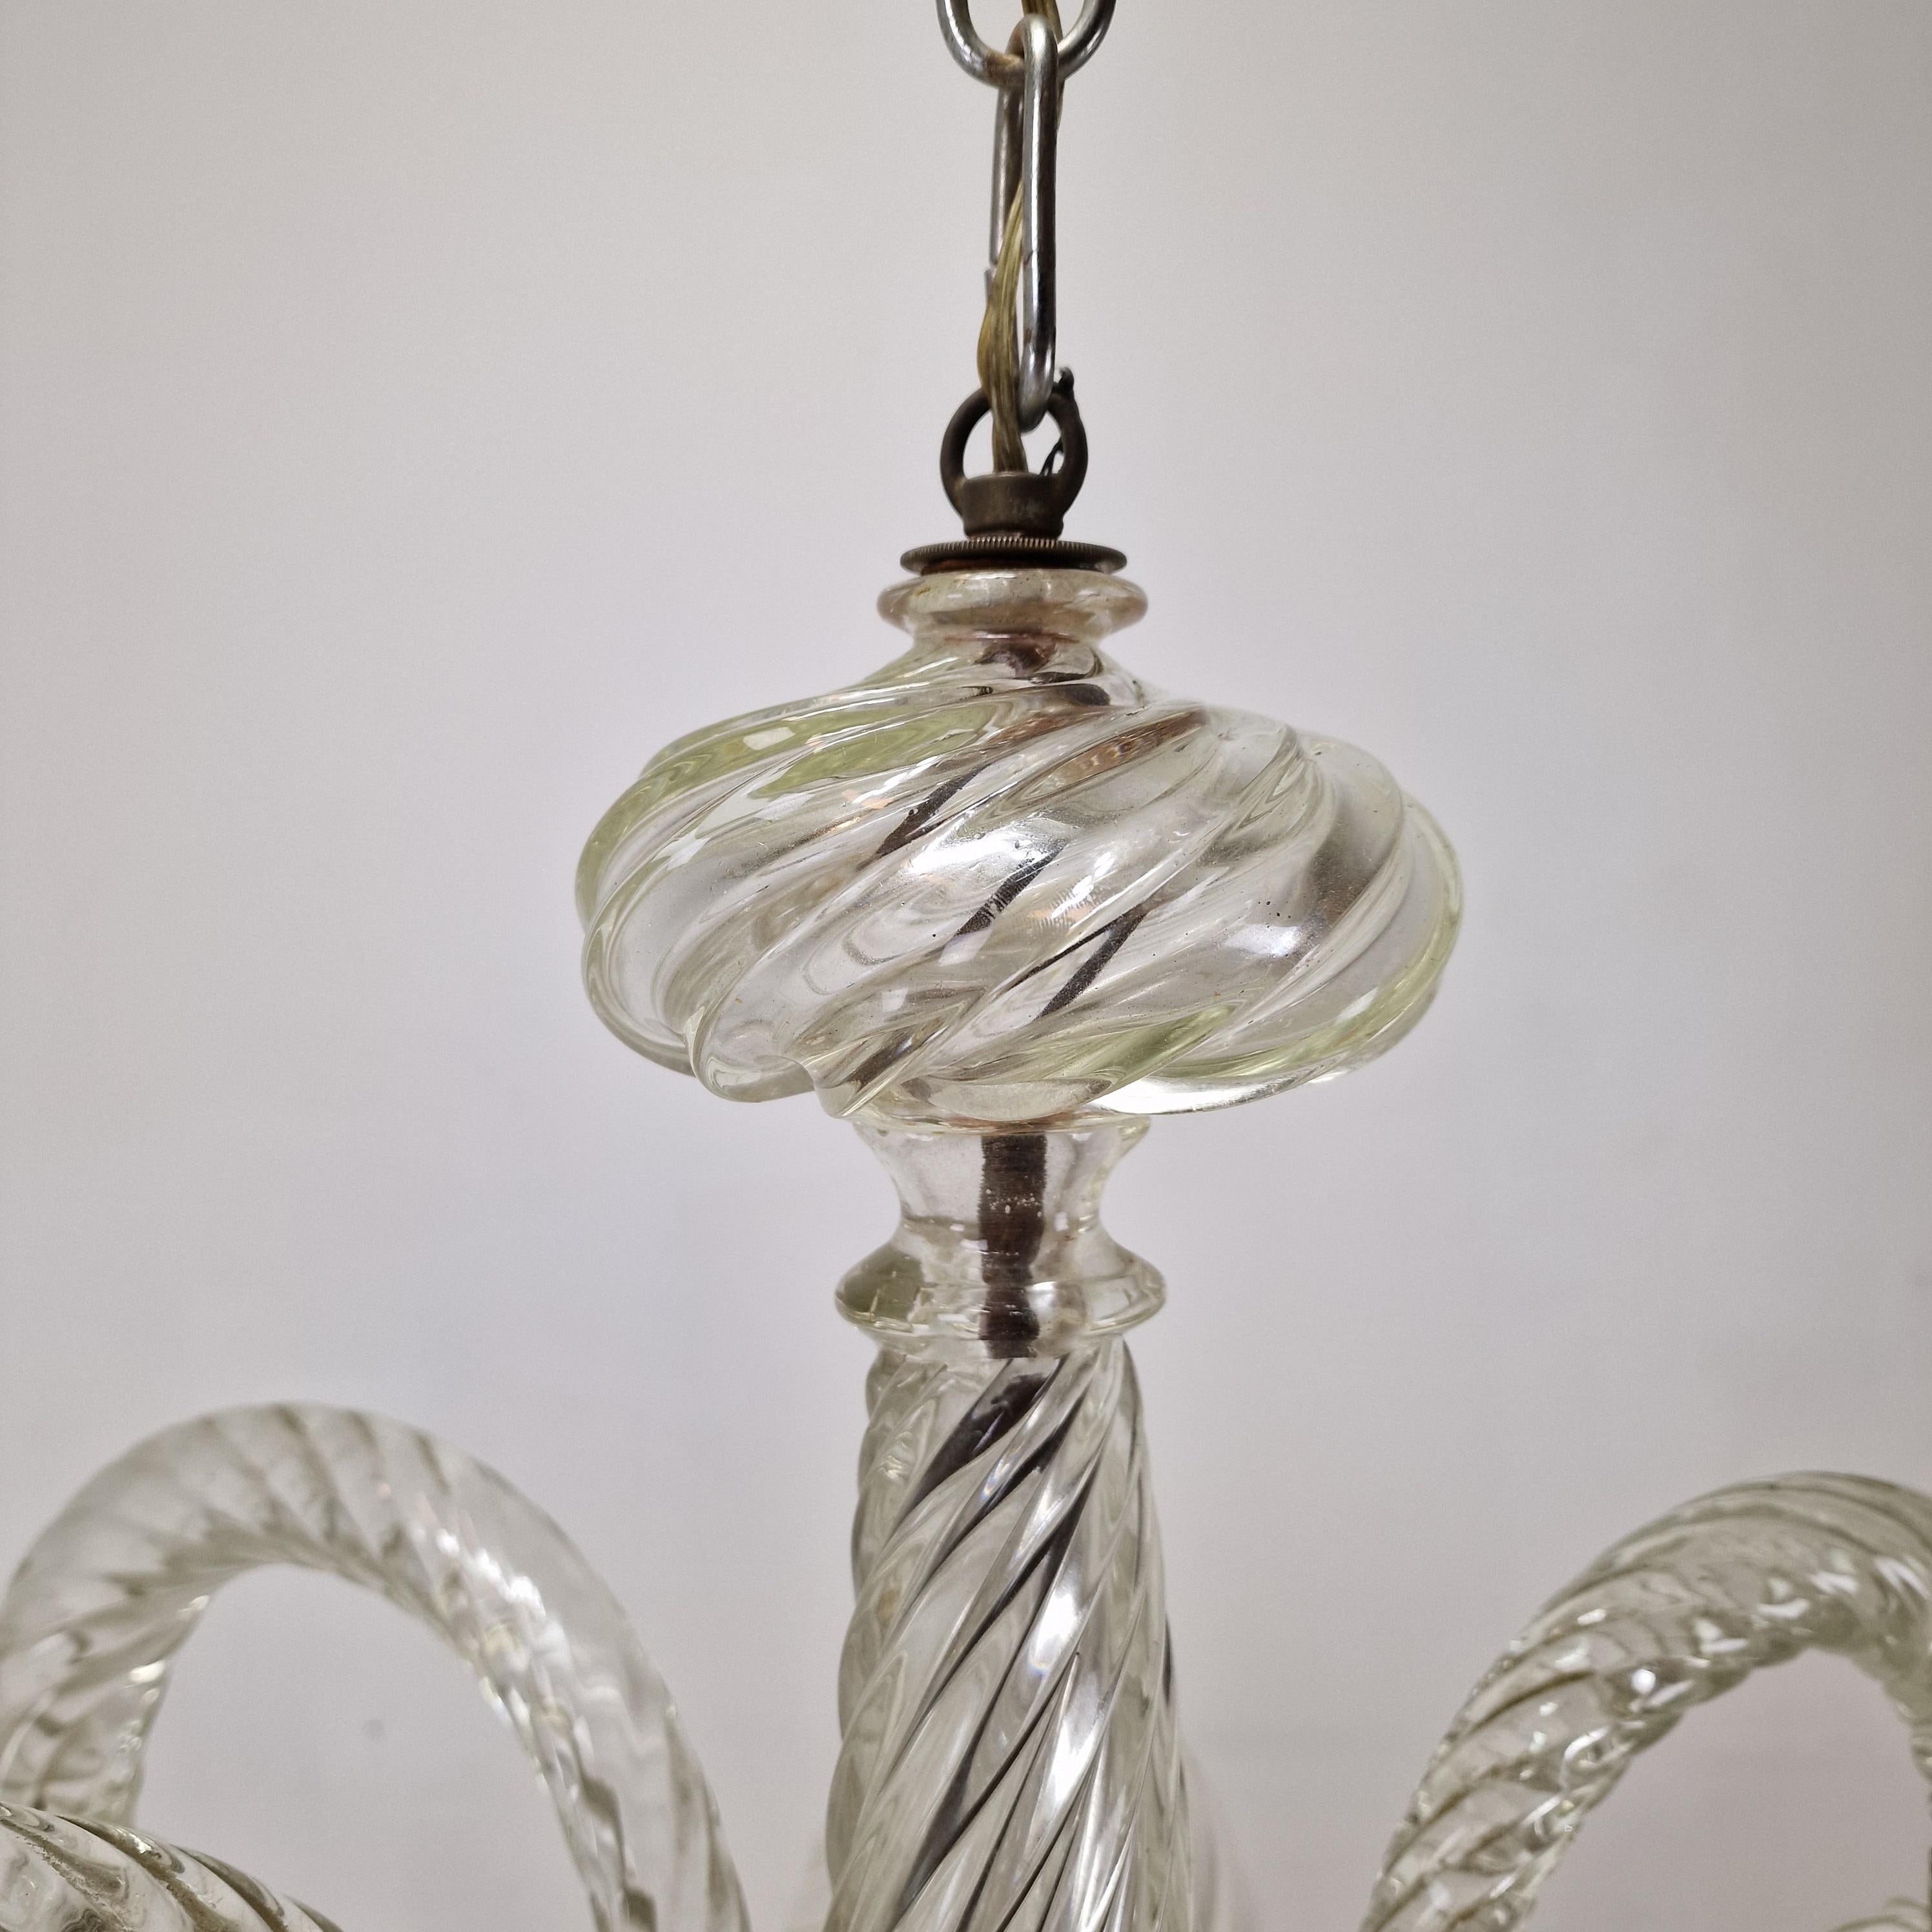 Barovier & Toso Murano Glass Chandelier, Italy 1950's For Sale 5